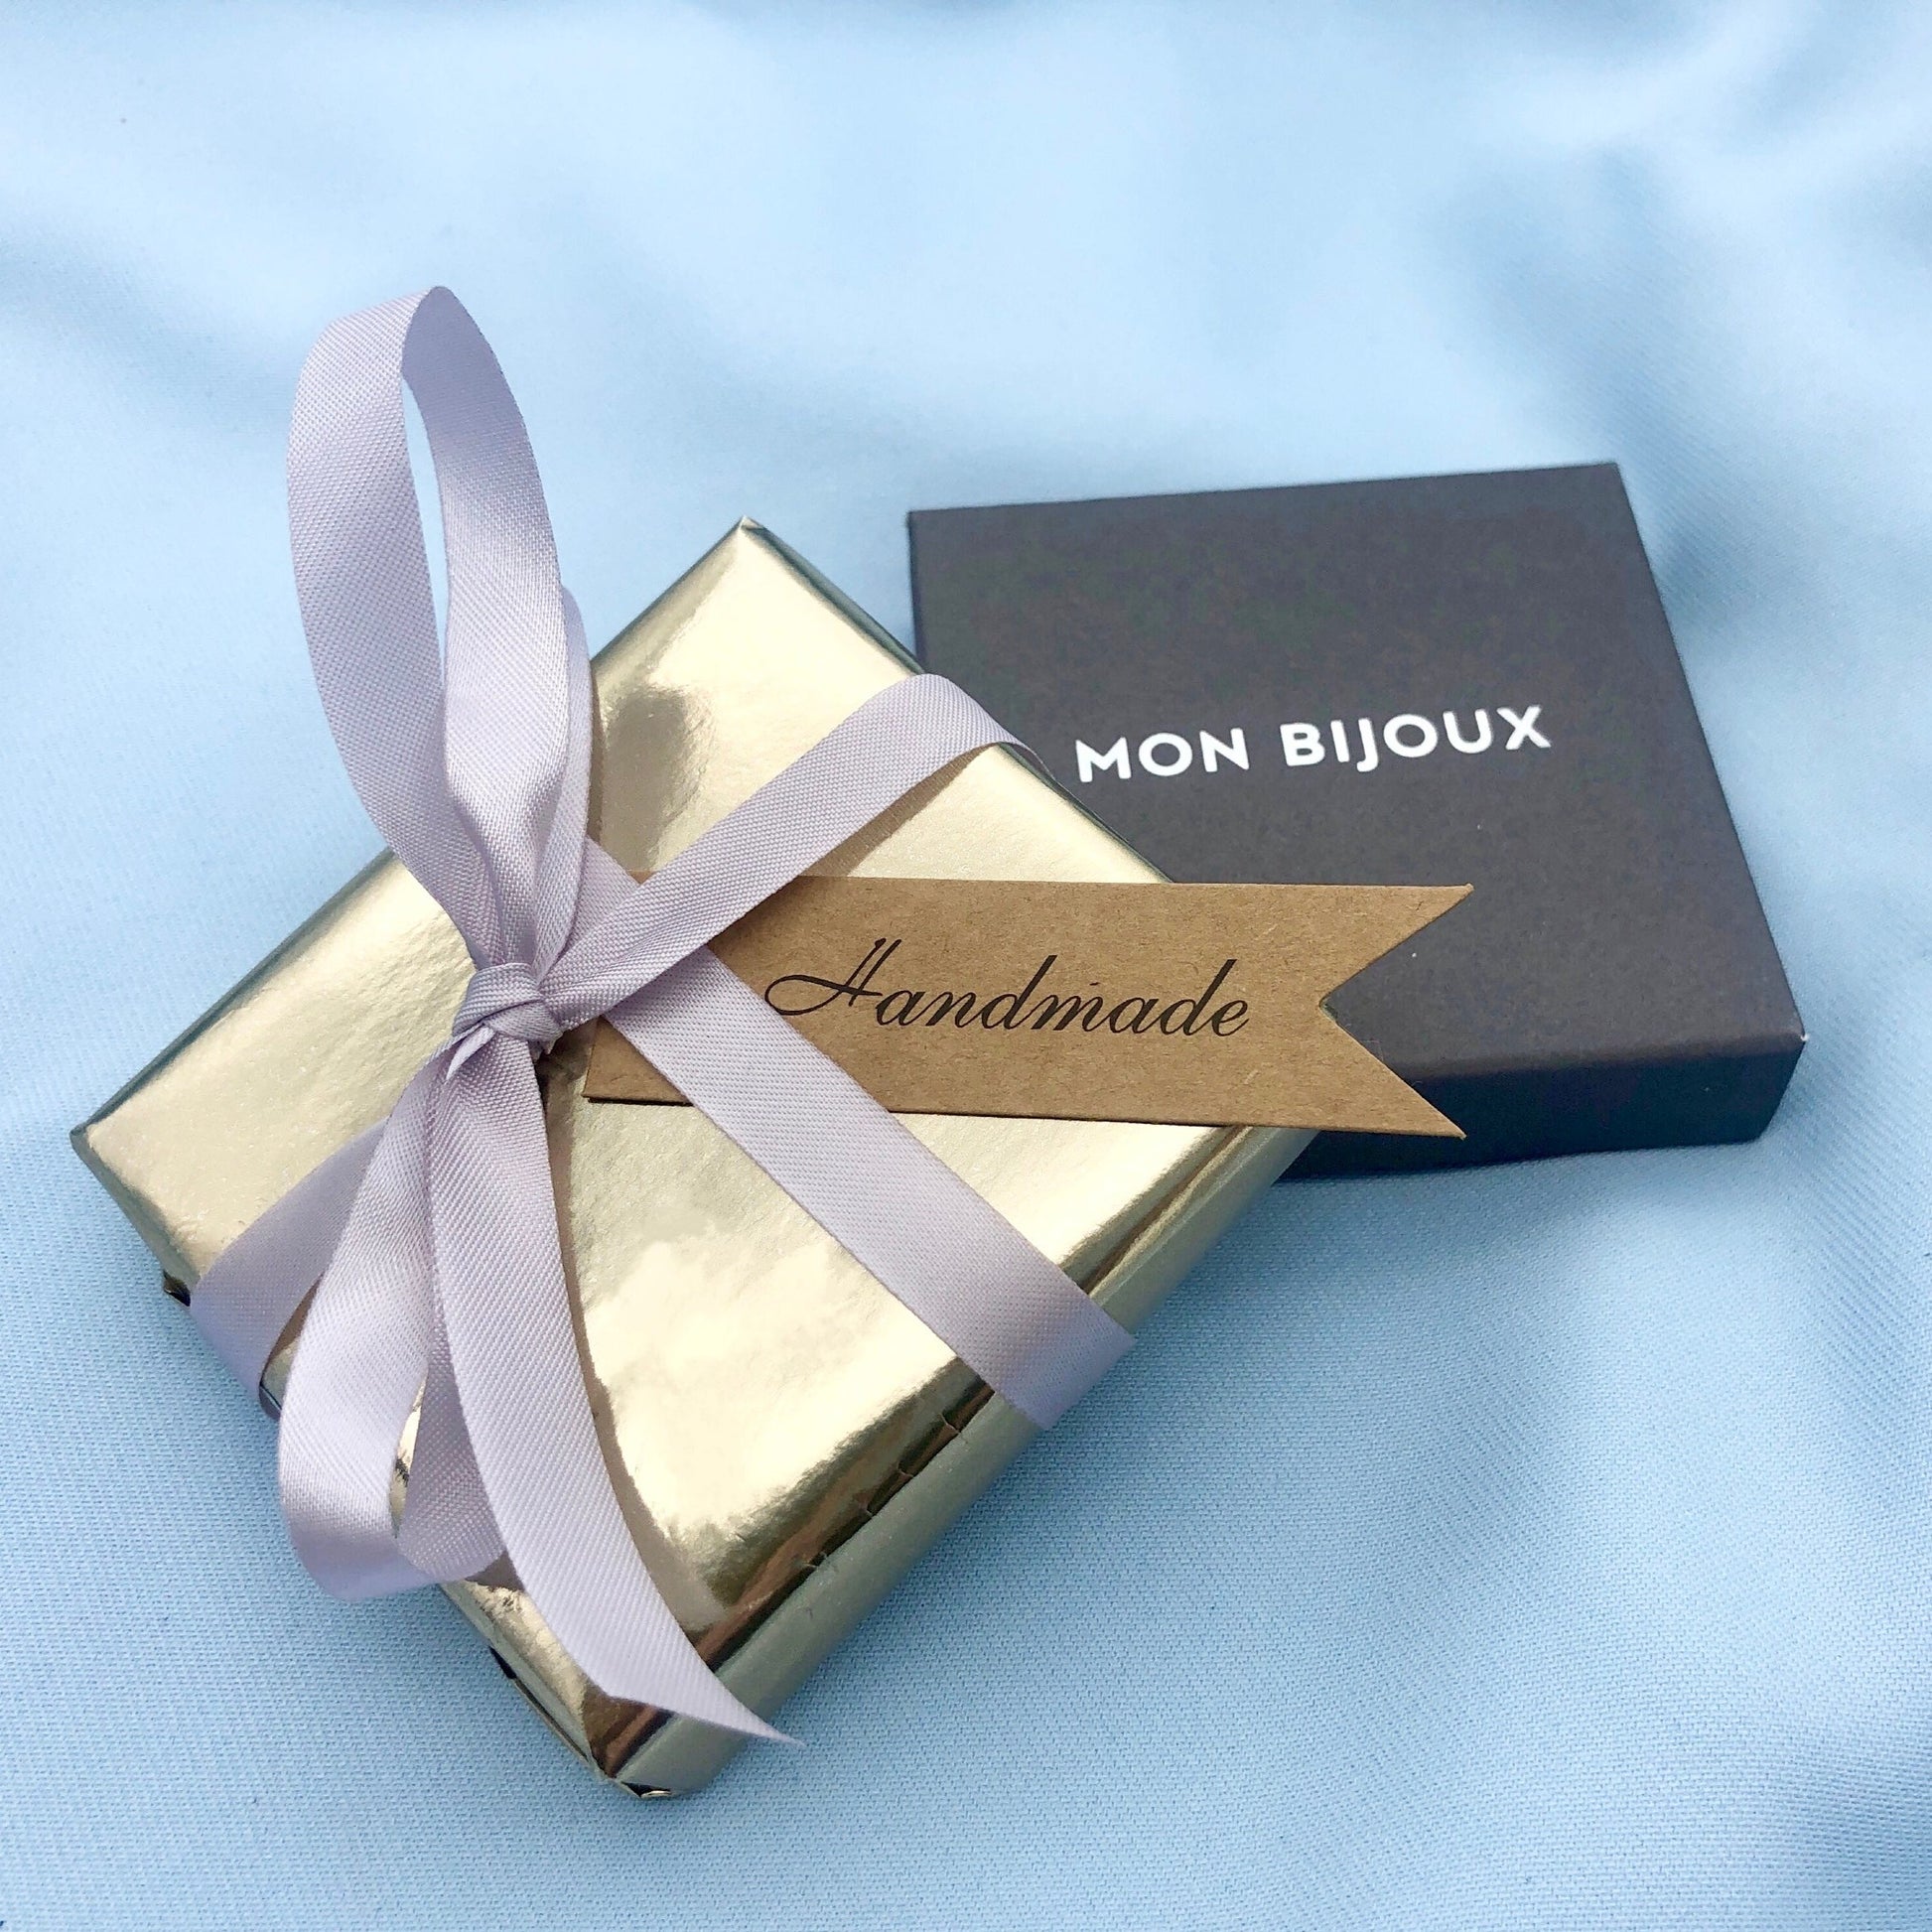 Mon Bijoux eco-friendly packaging made from recycled boxes